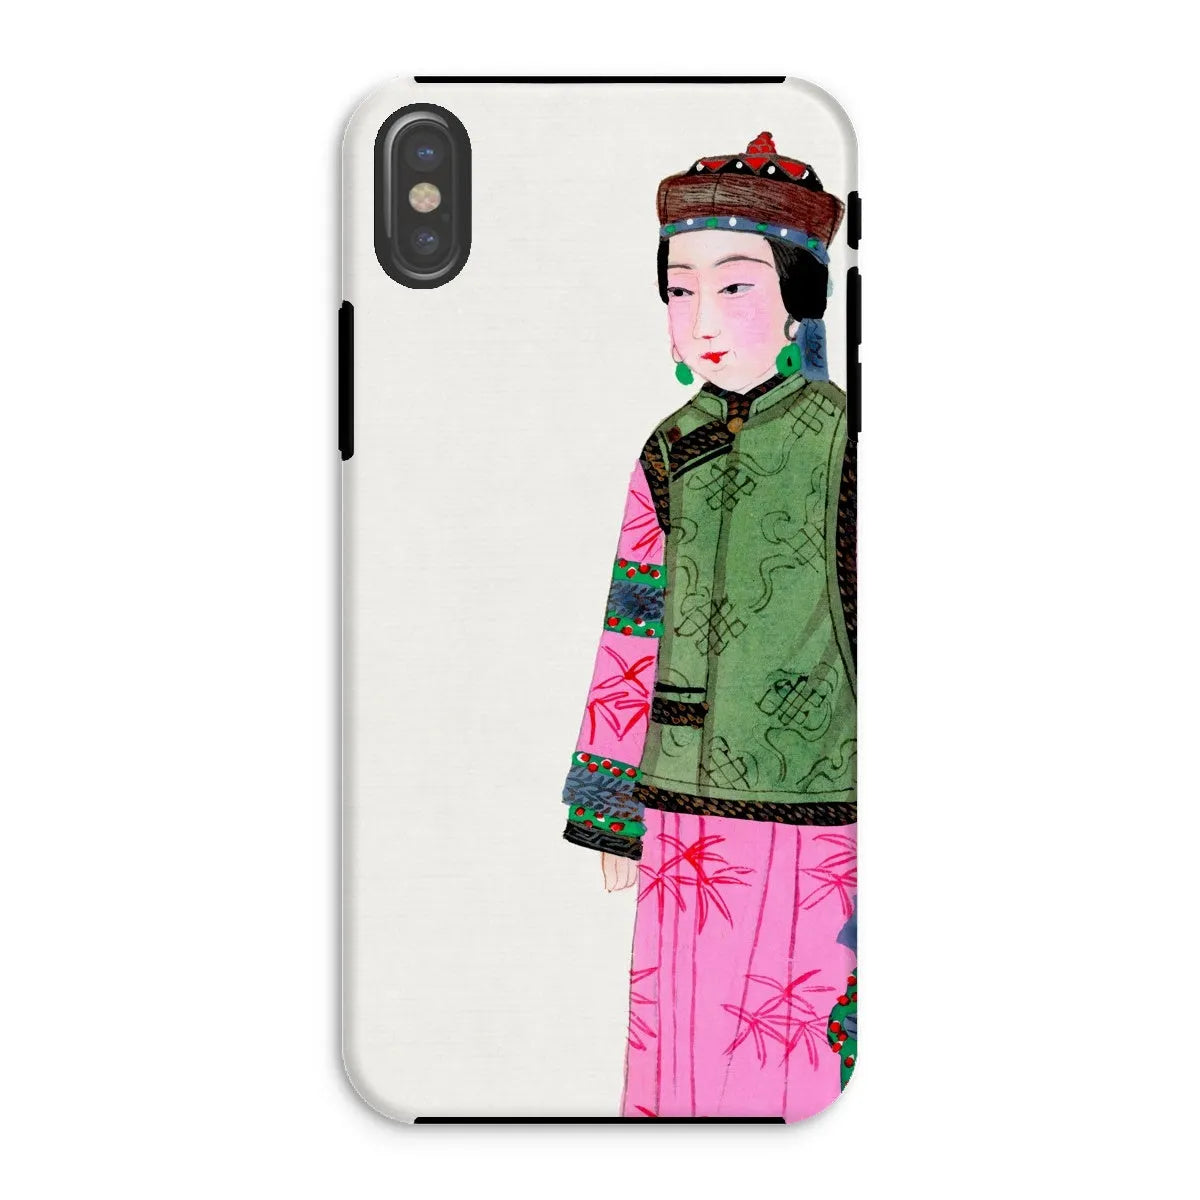 Noblewoman In Winter - Chinese Aesthetic Art Phone Case - Iphone Xs / Matte - Mobile Phone Cases - Aesthetic Art